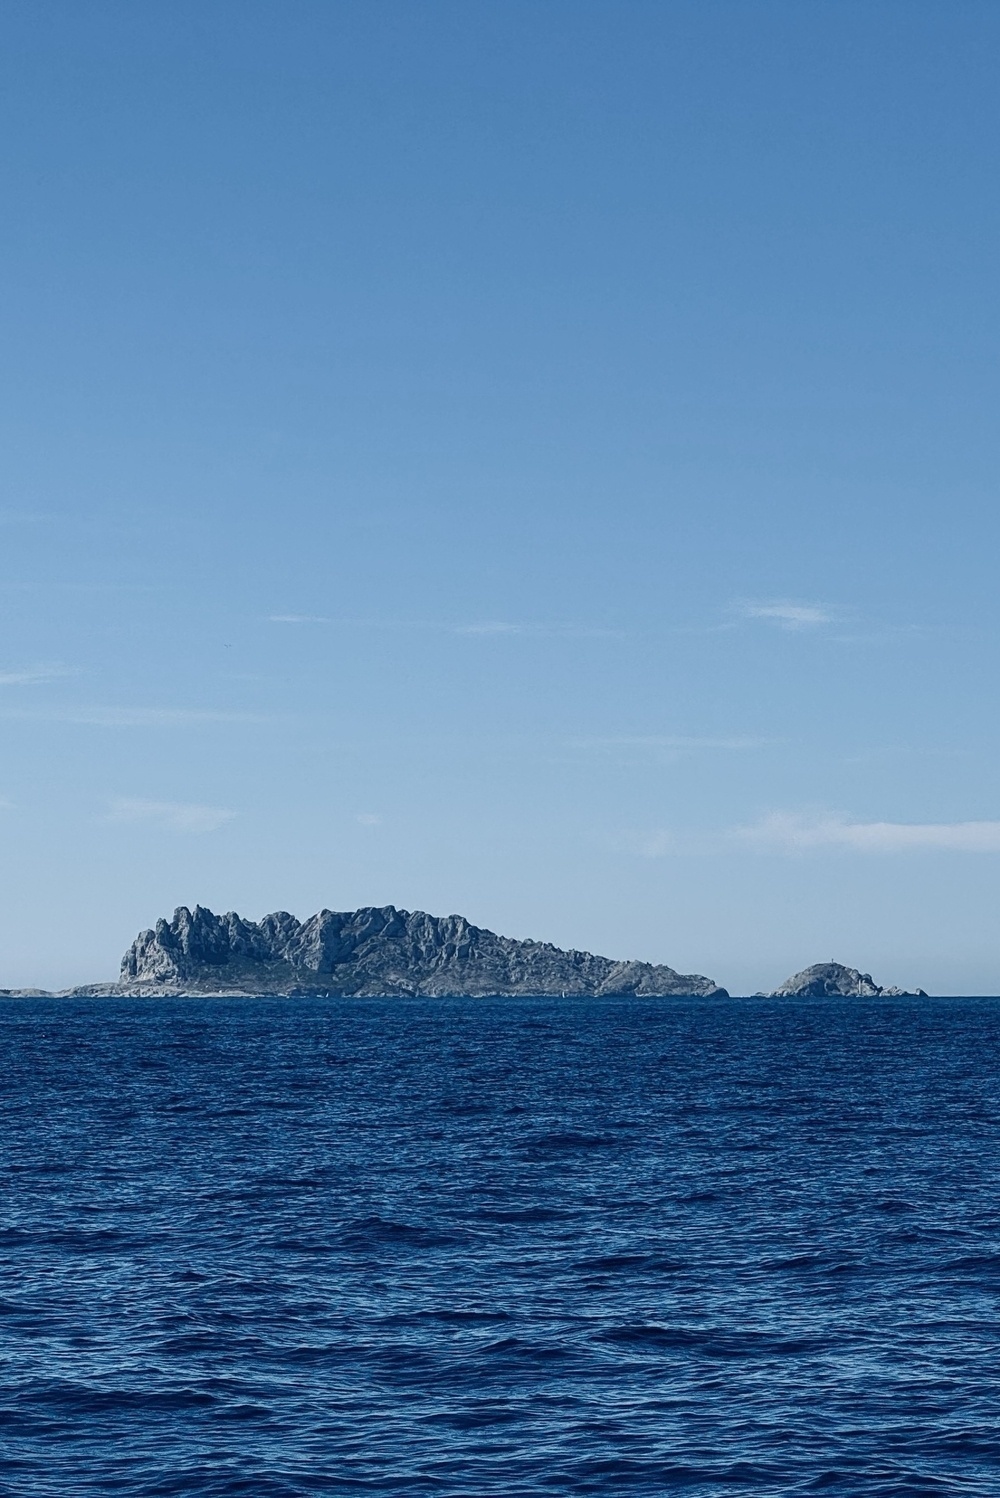 A rocky headland sticking out of the Mediterranean Sea.